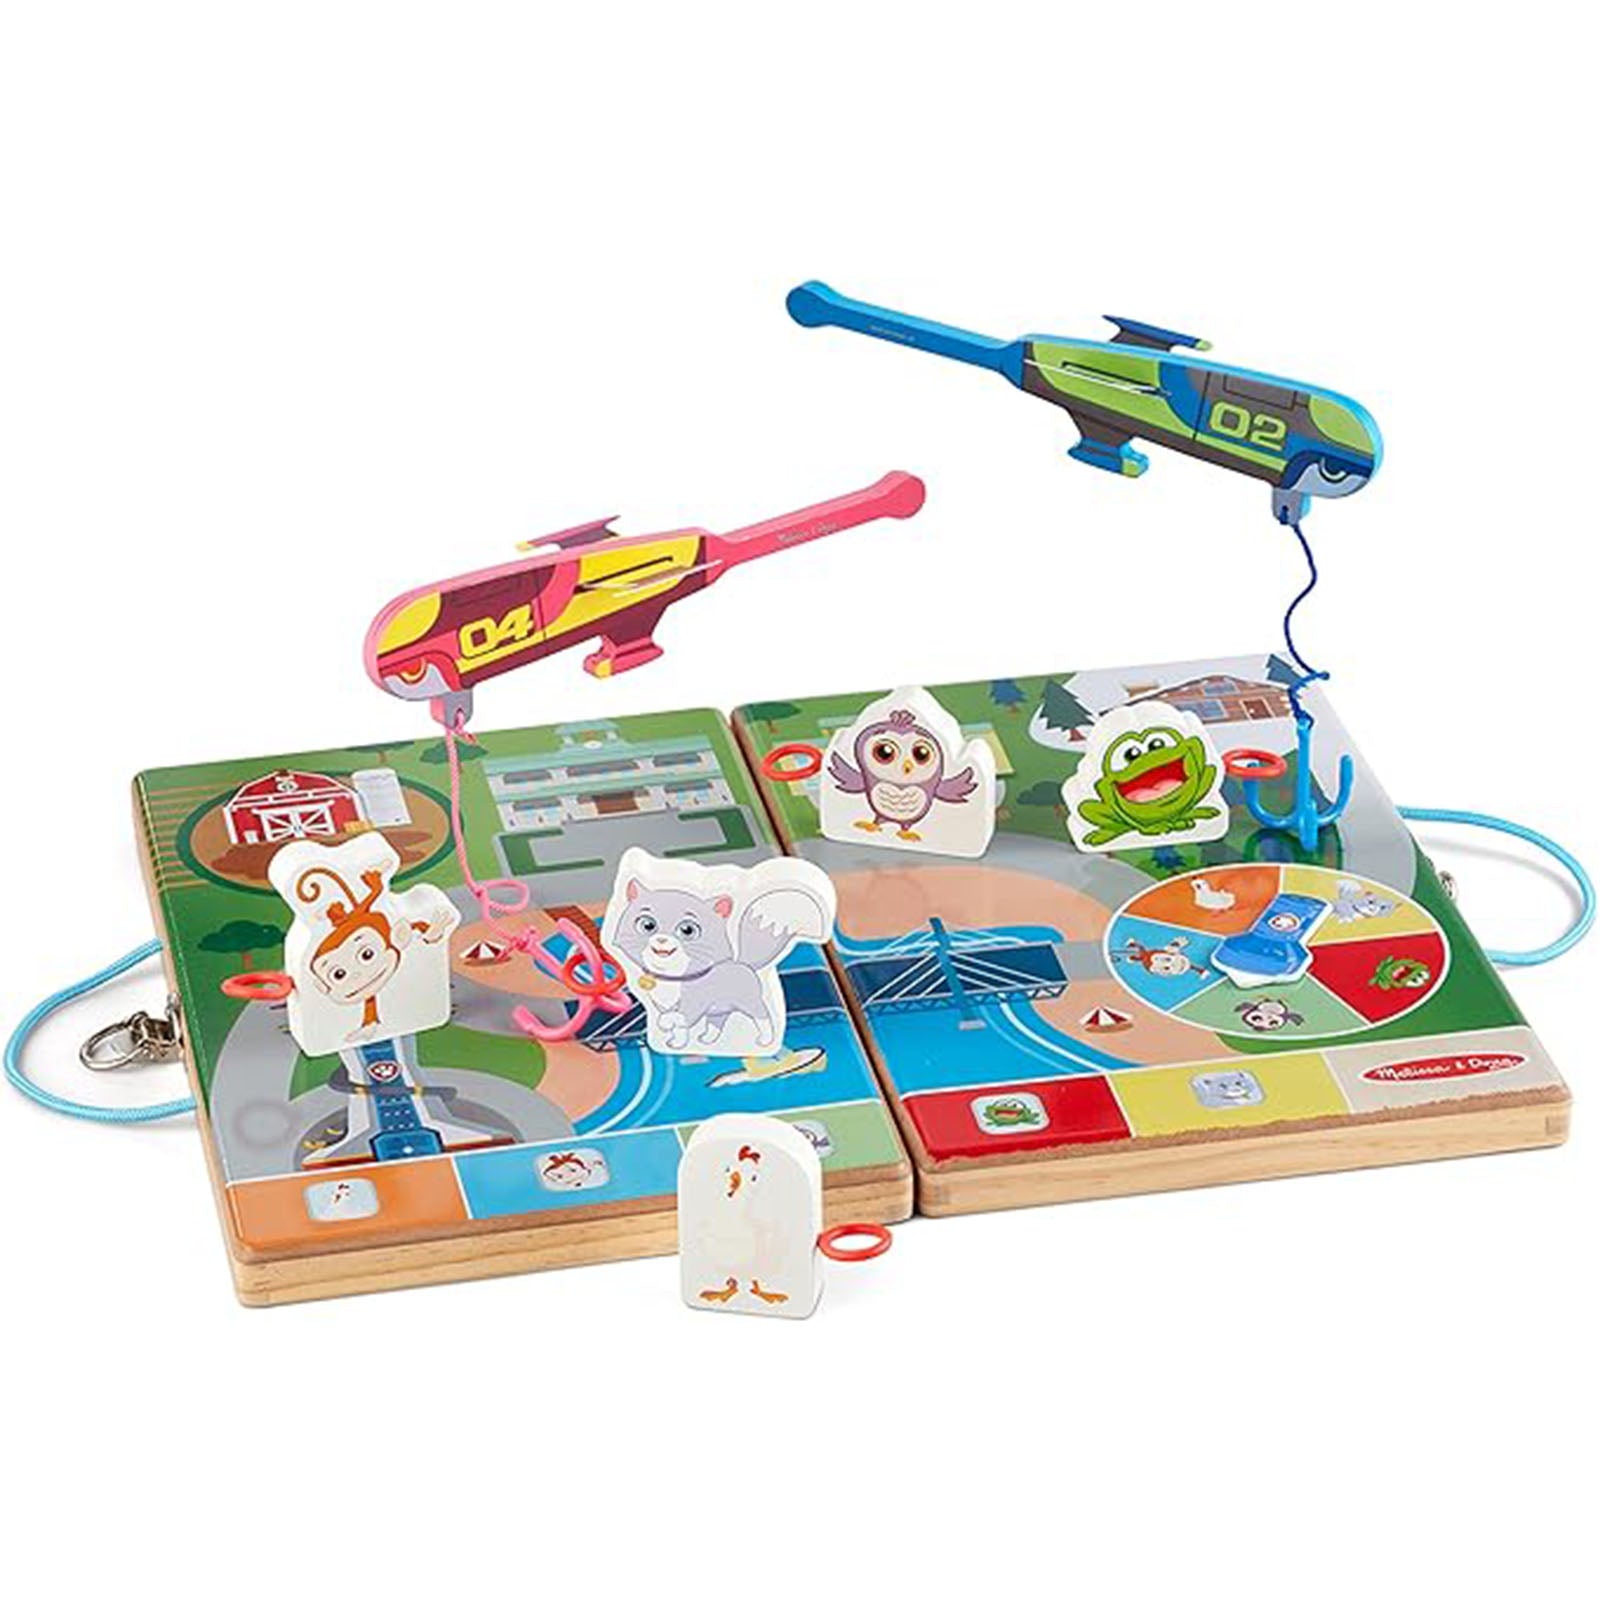 Paw Patrol Spy, Find and Rescue Play Set